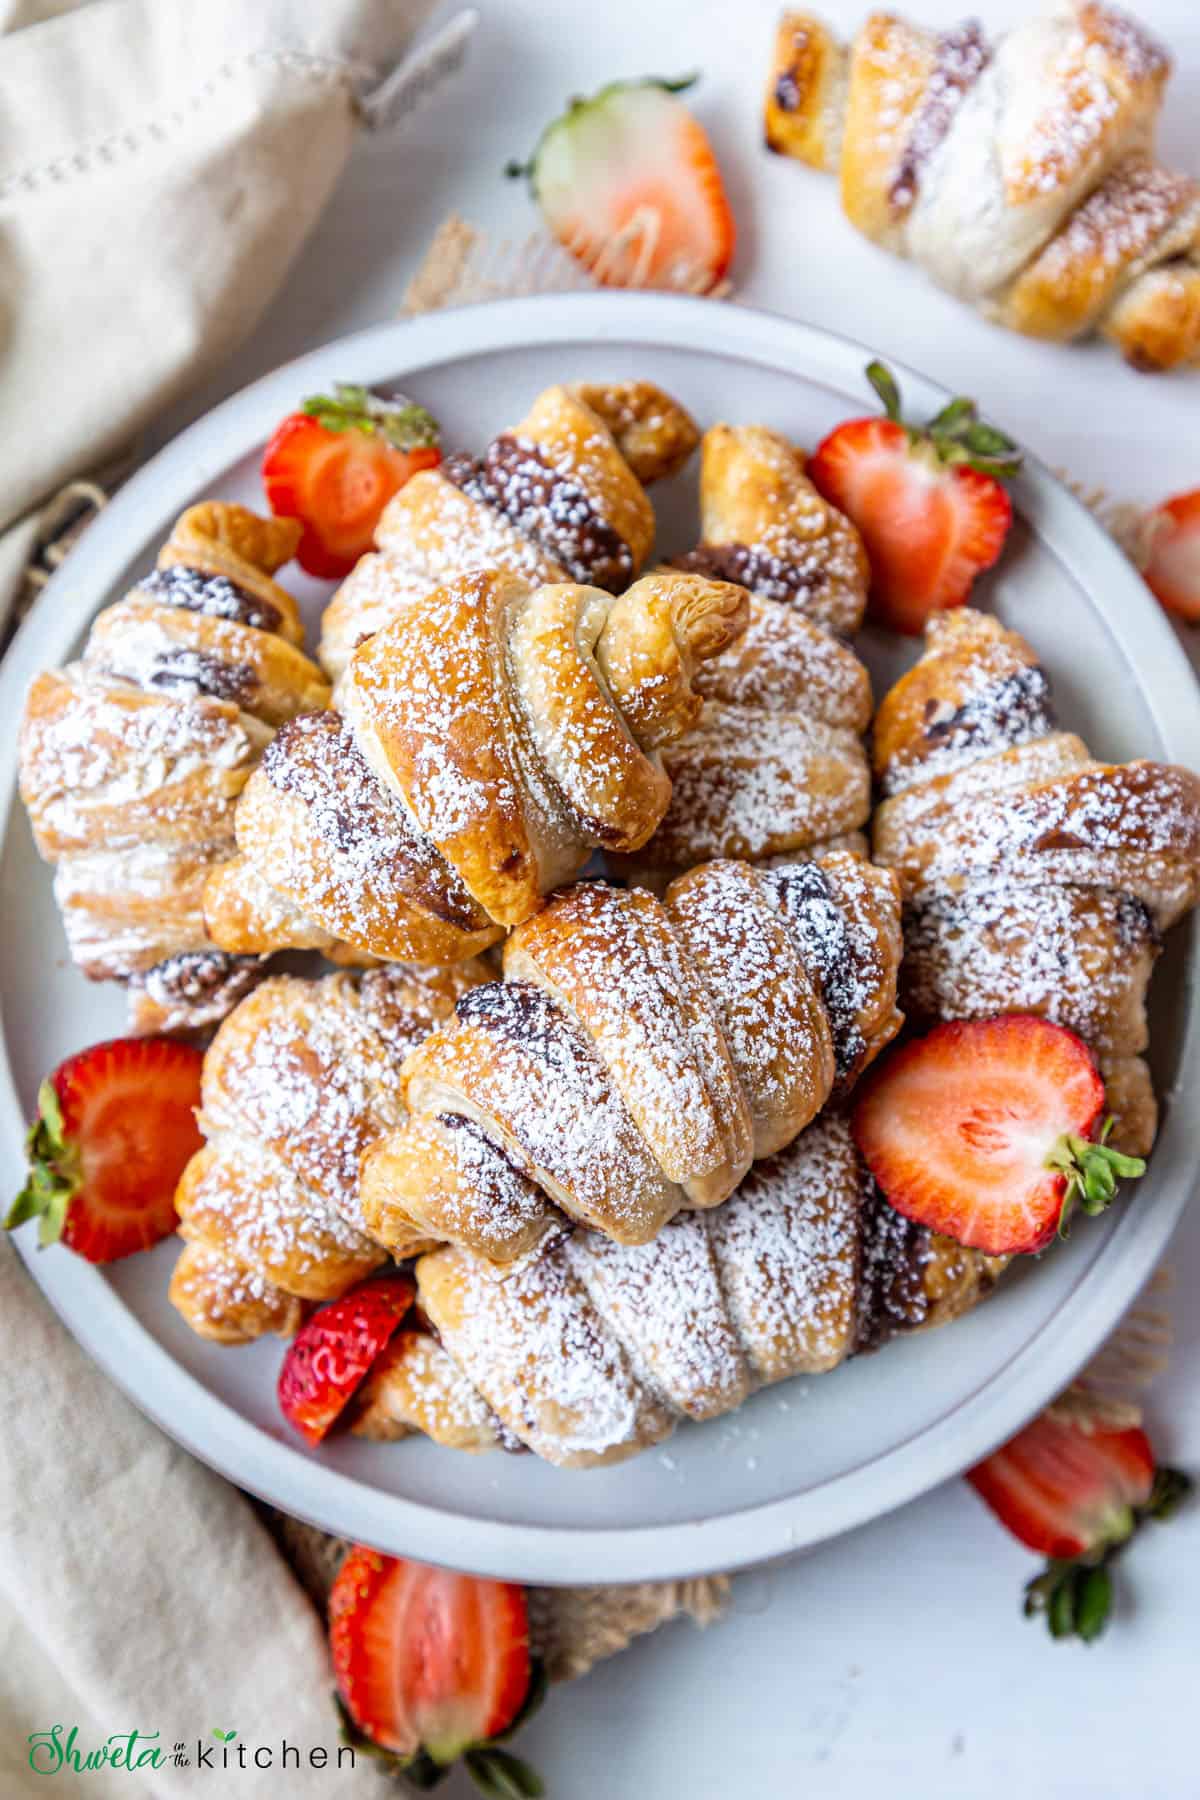 Top view of Nutella filled croissants dusted with powdered sugar piled on a plate along with cut strawberries